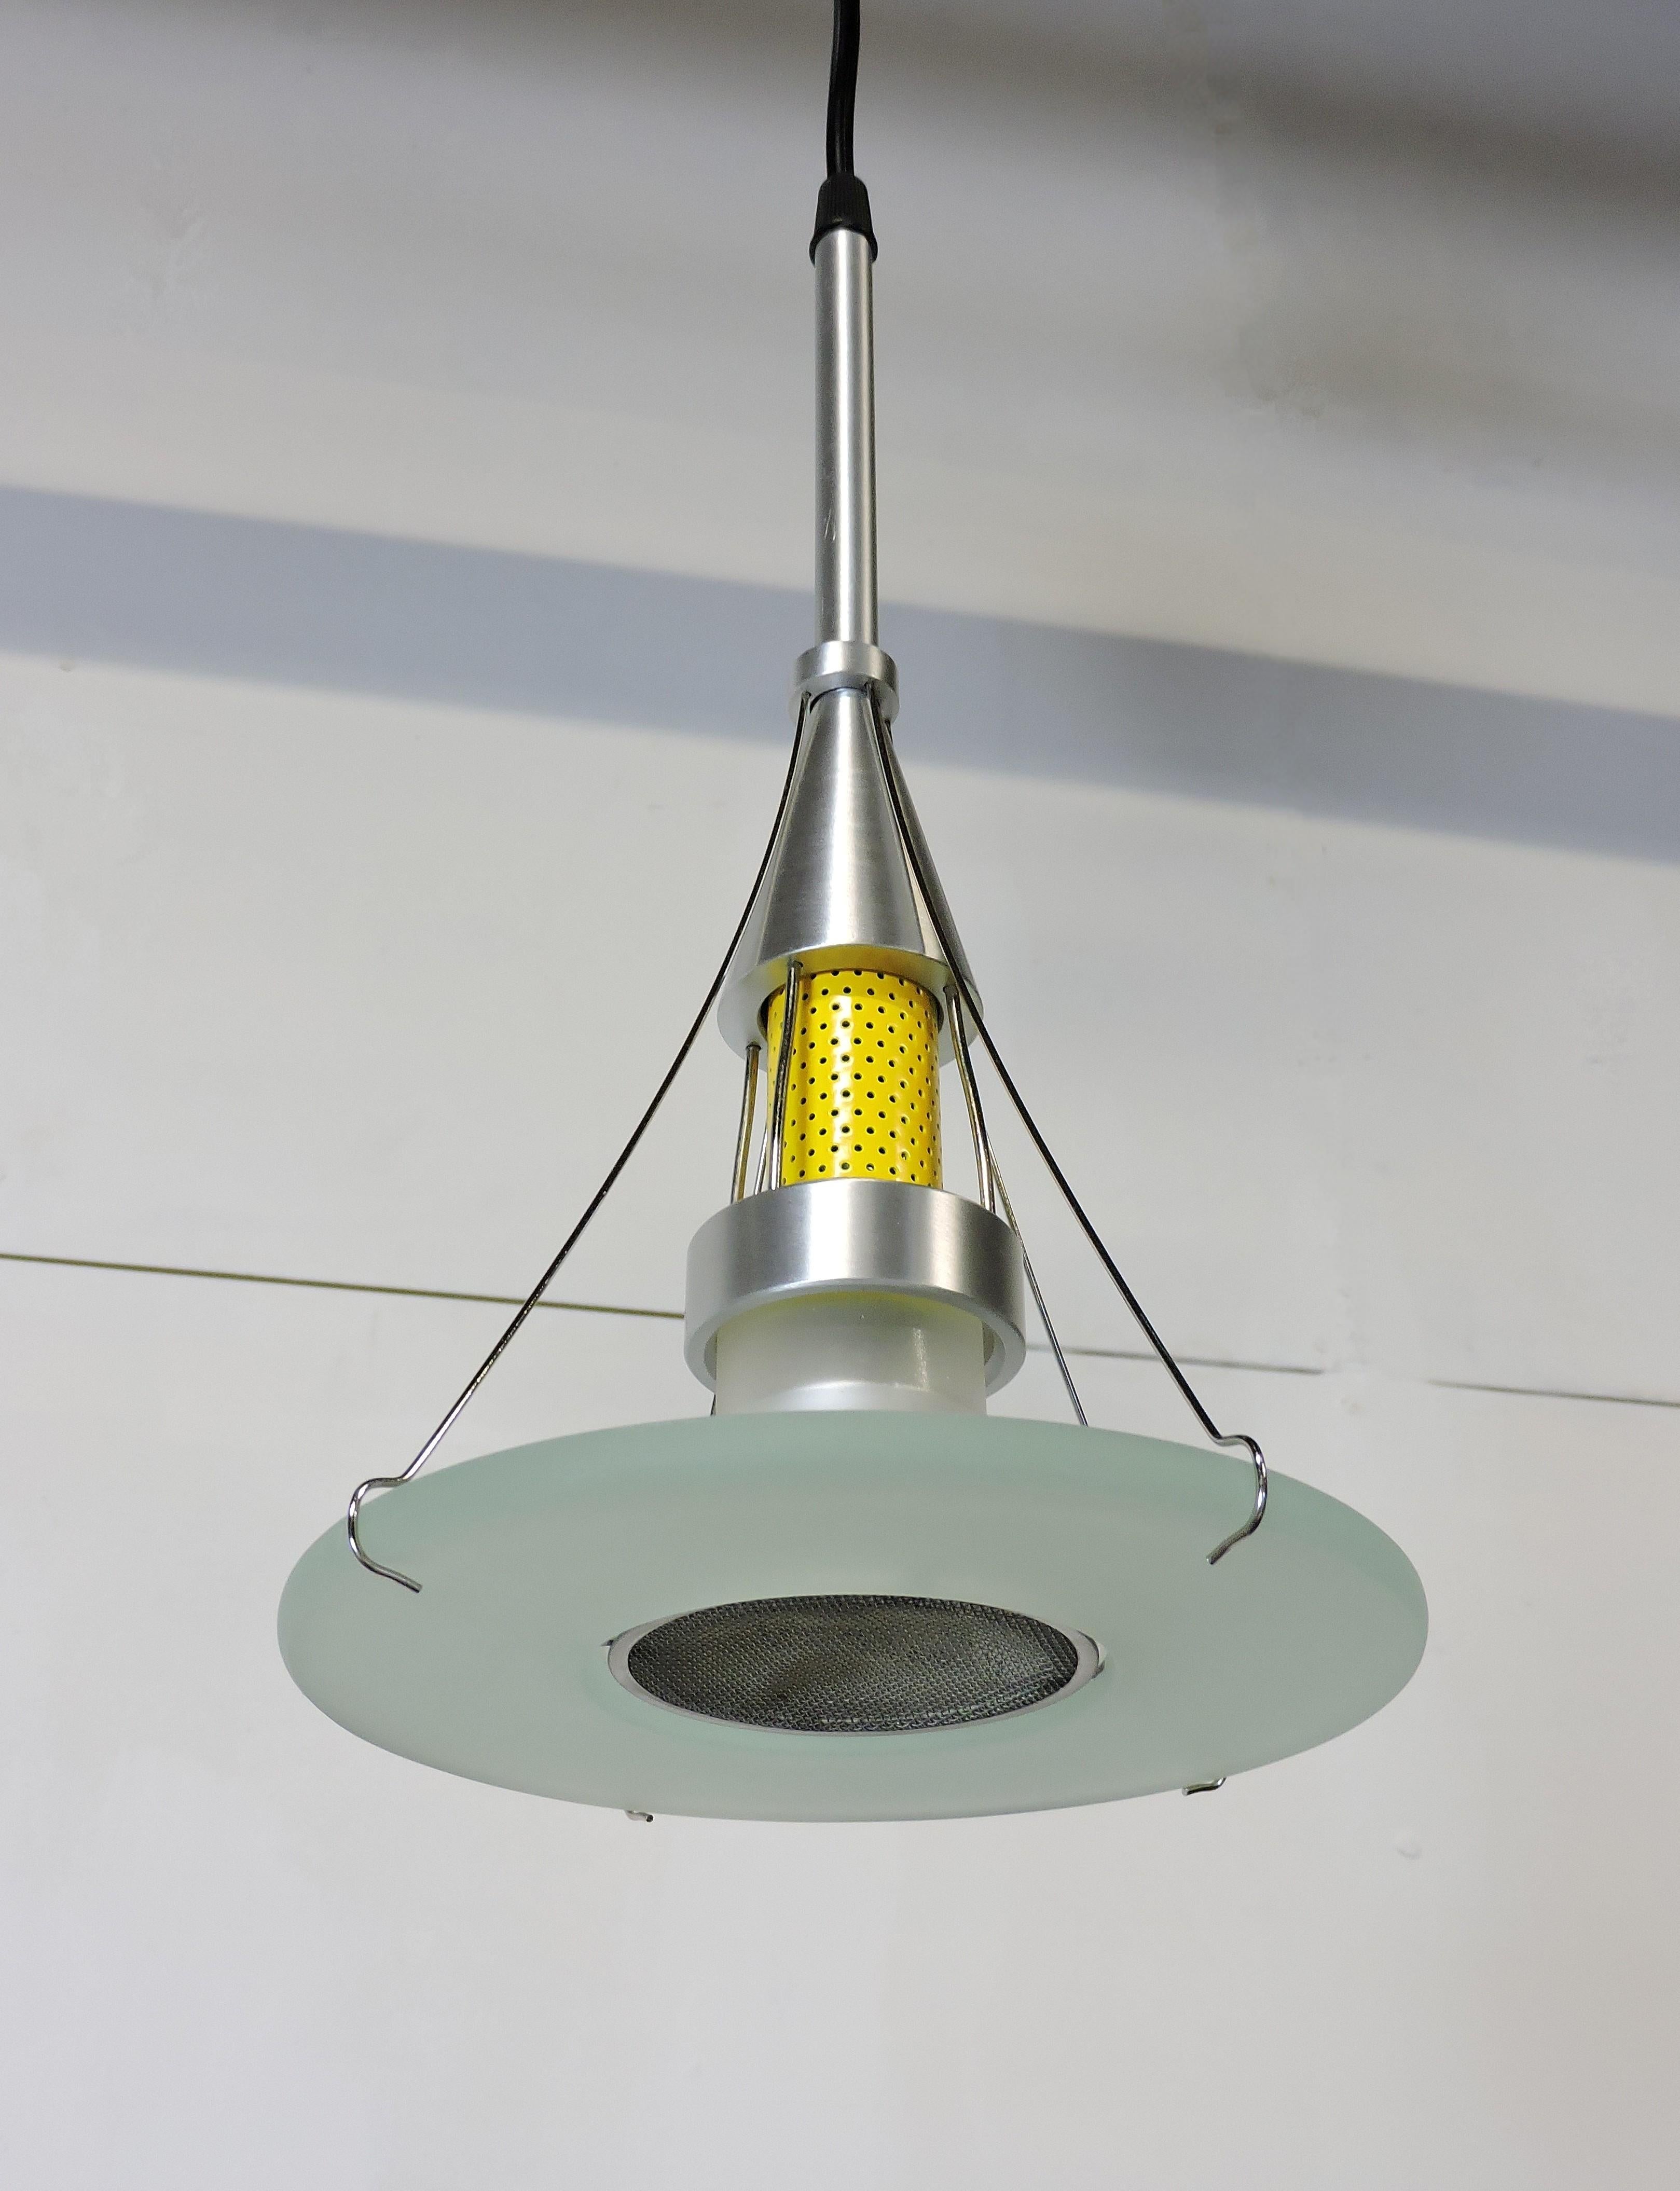 Very cool Industrial style ventilator pendant lamp originally designed by Robert Sonneman for George Kovacs in 1990 and manufactured in 2005 by Robert Sonneman Contemporary Visions. This light is made of frosted glass, brushed aluminum, and bright